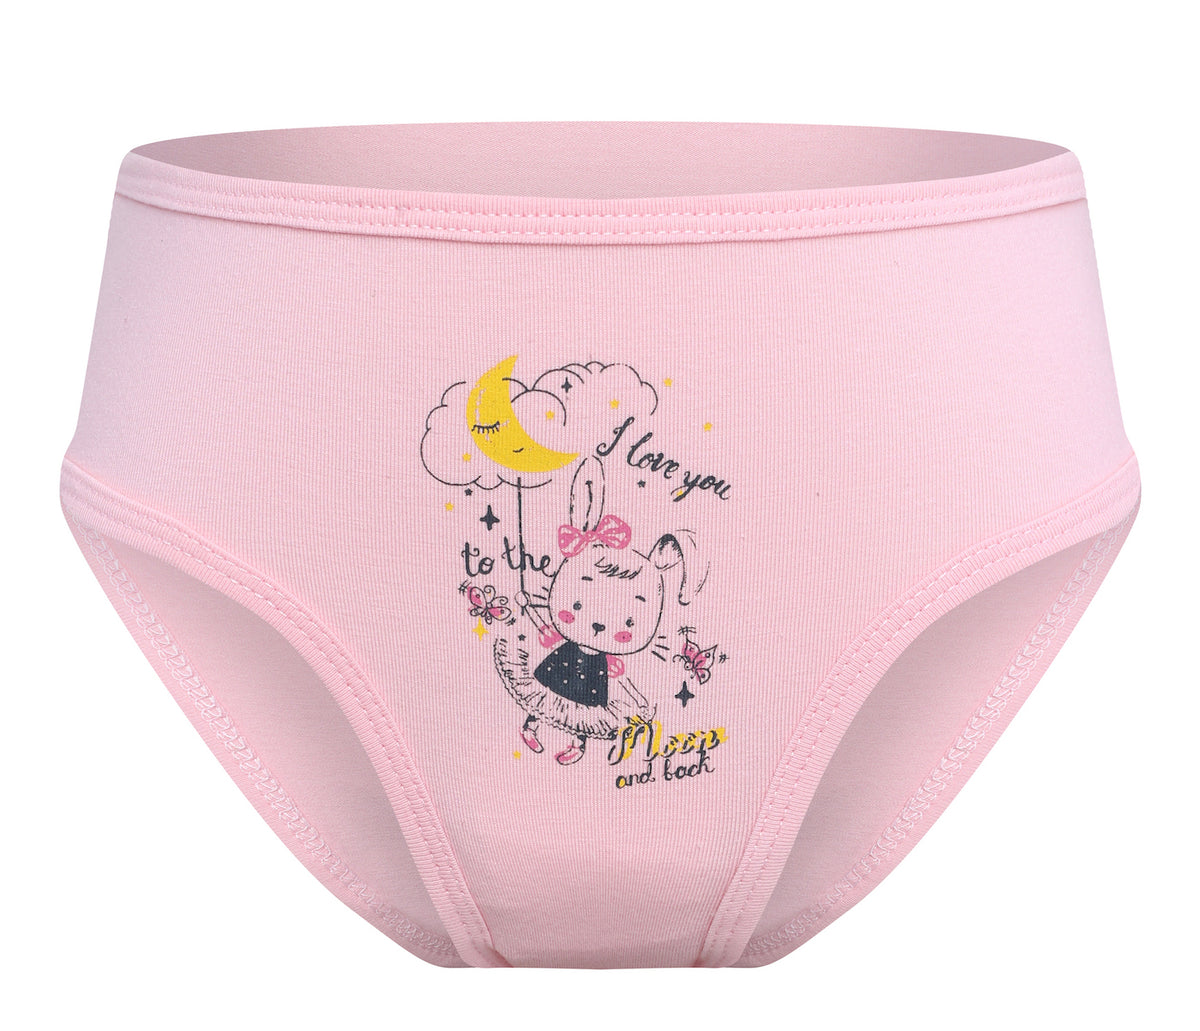 Girl's 3 Color panties, high quality cotton soft, girls children brief –  TUSSONI